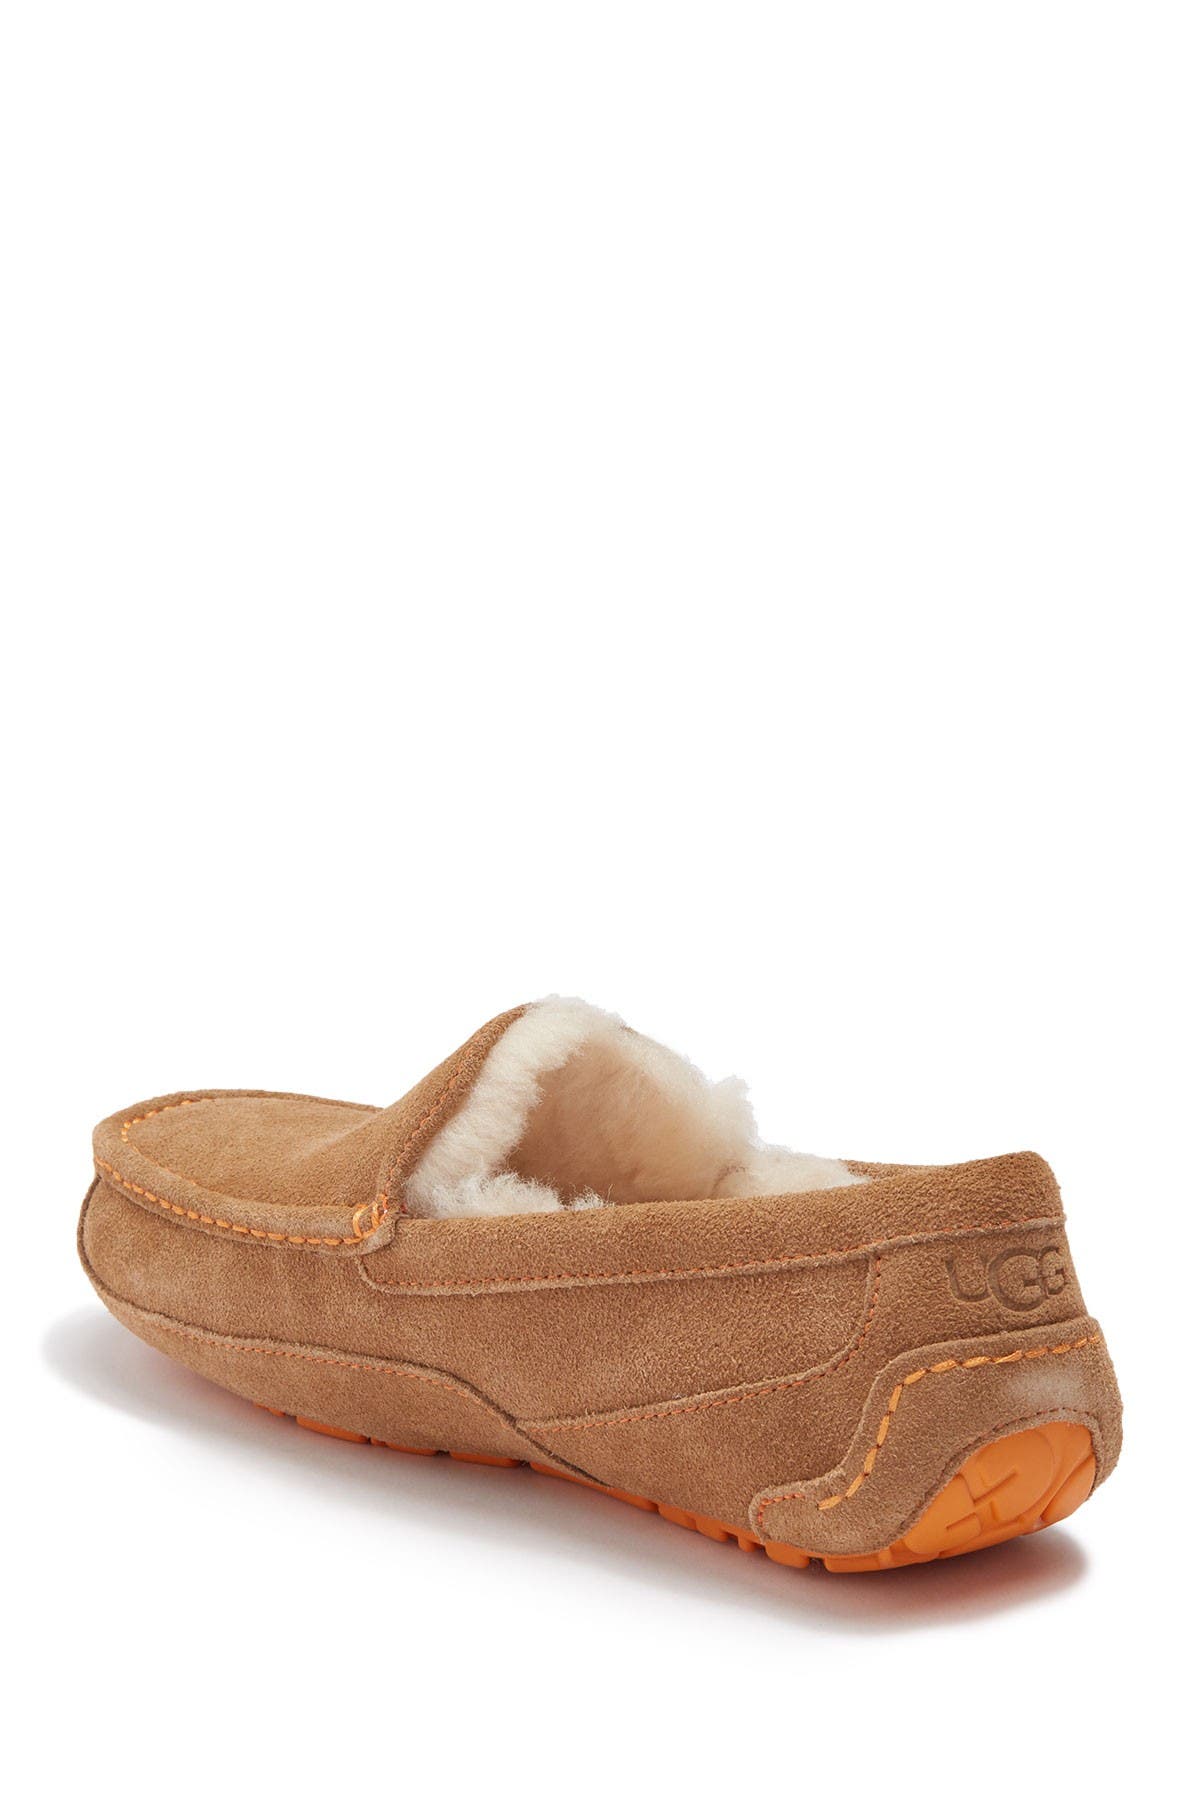 ugg pure slippers